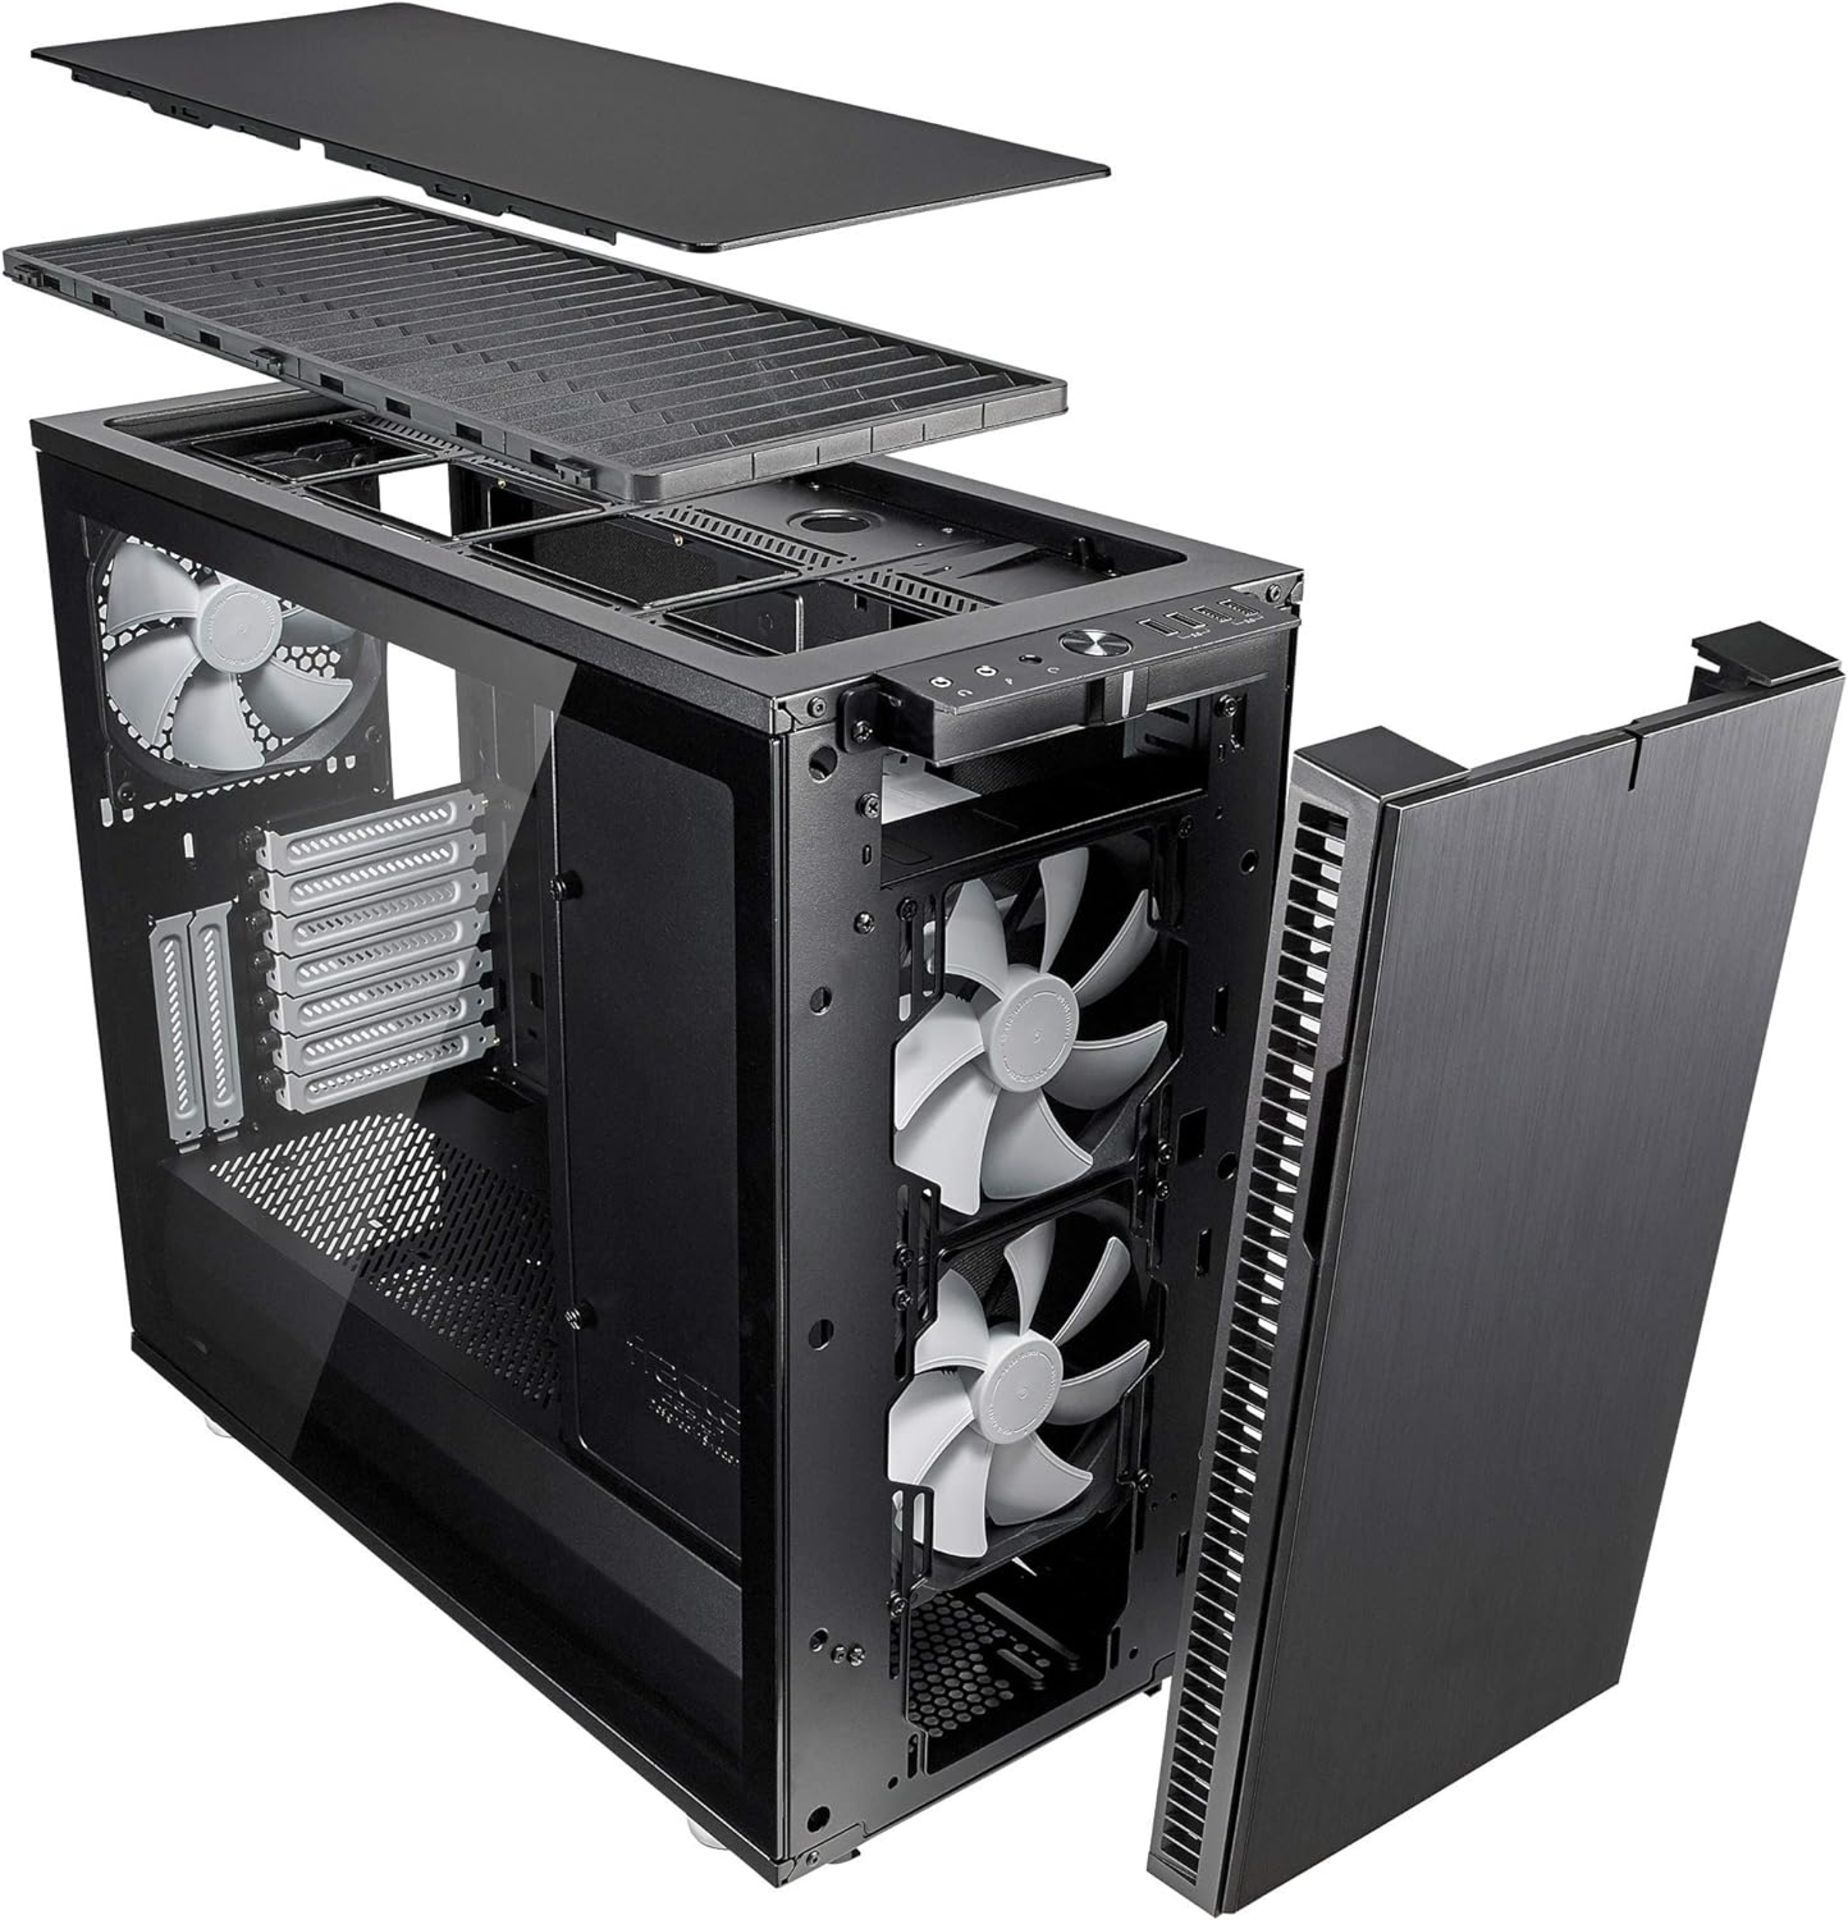 NEW & BOXED FRACTAL DESIGN Define R6 Mid Tower ATX Computer Case- BLACK. RRP £161.94. (R6-7). - Image 8 of 8